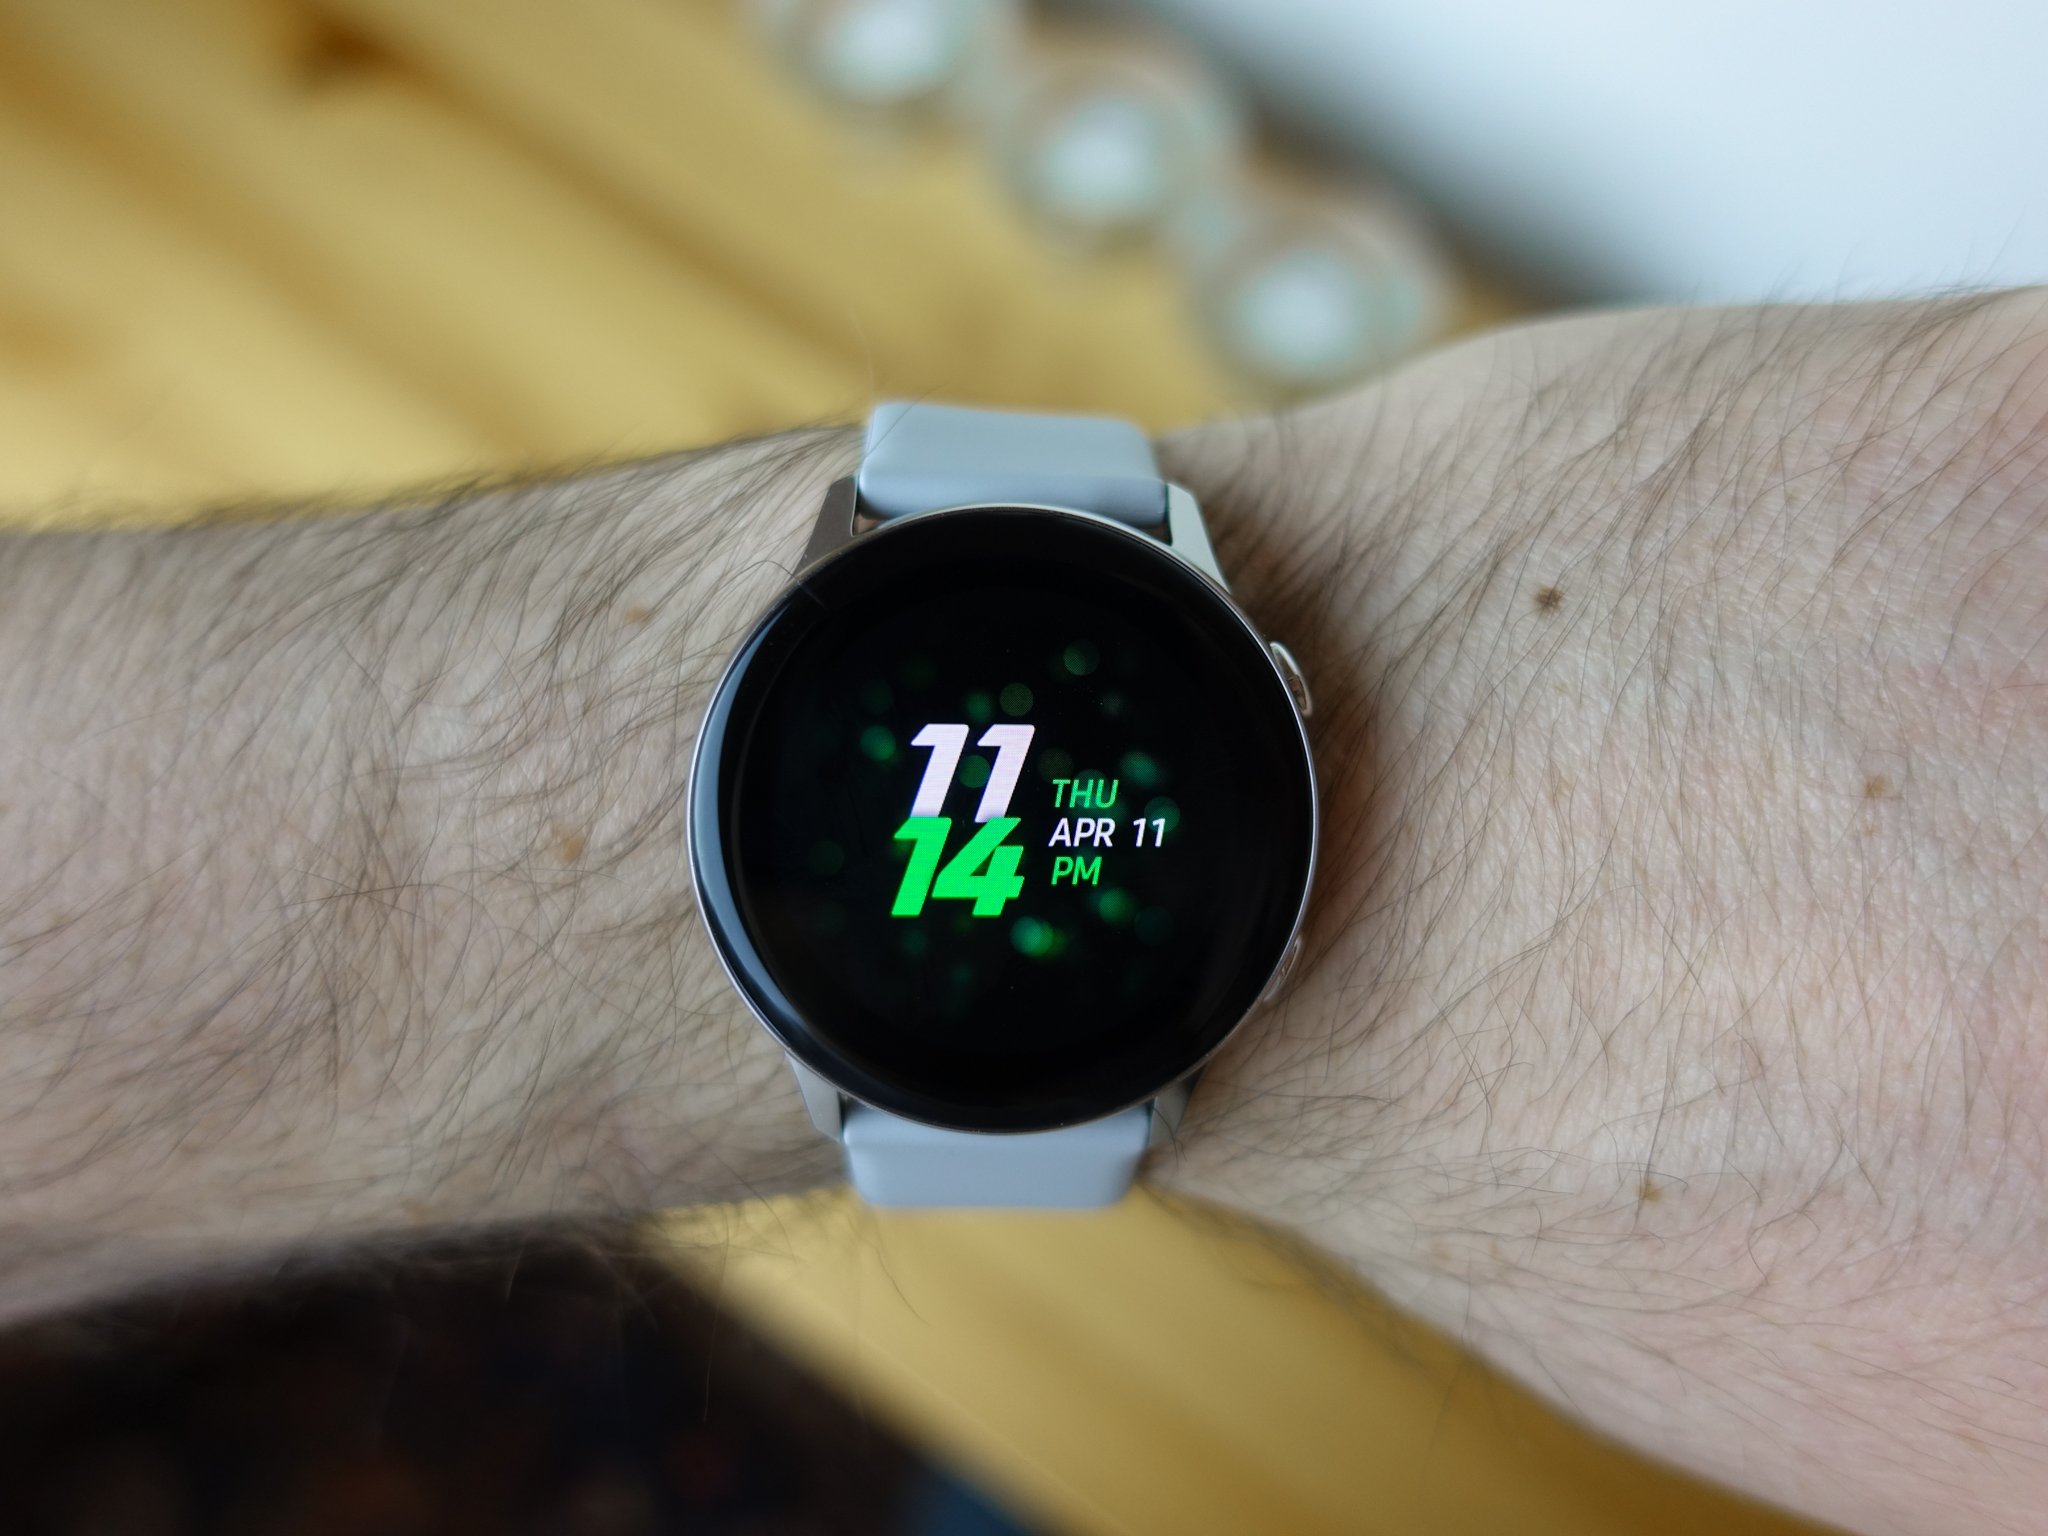 android smartwatch 2019